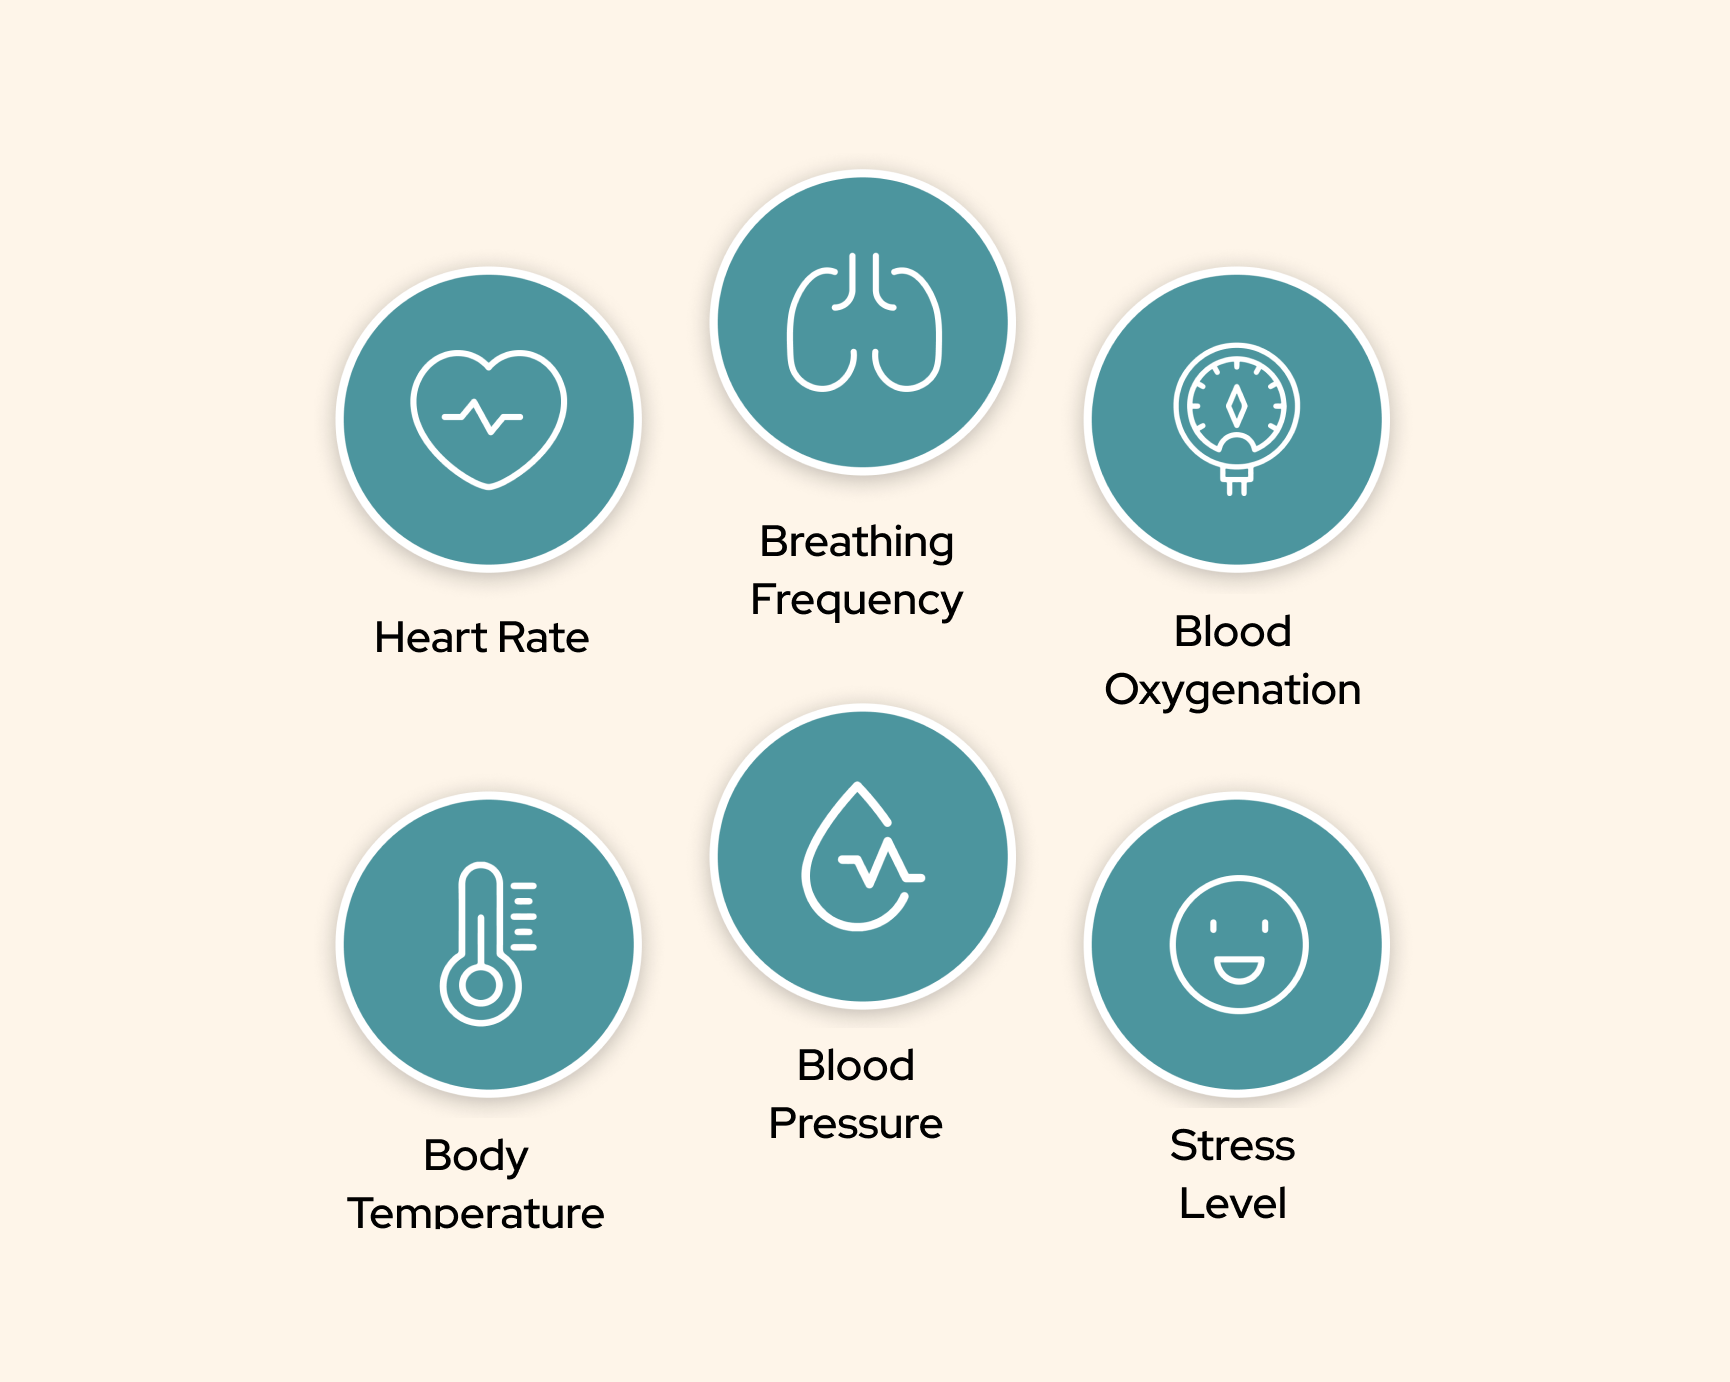 Parameters: heart rate, breathing frequency, blood oxygenation, body temperature, blood pressure, stress level